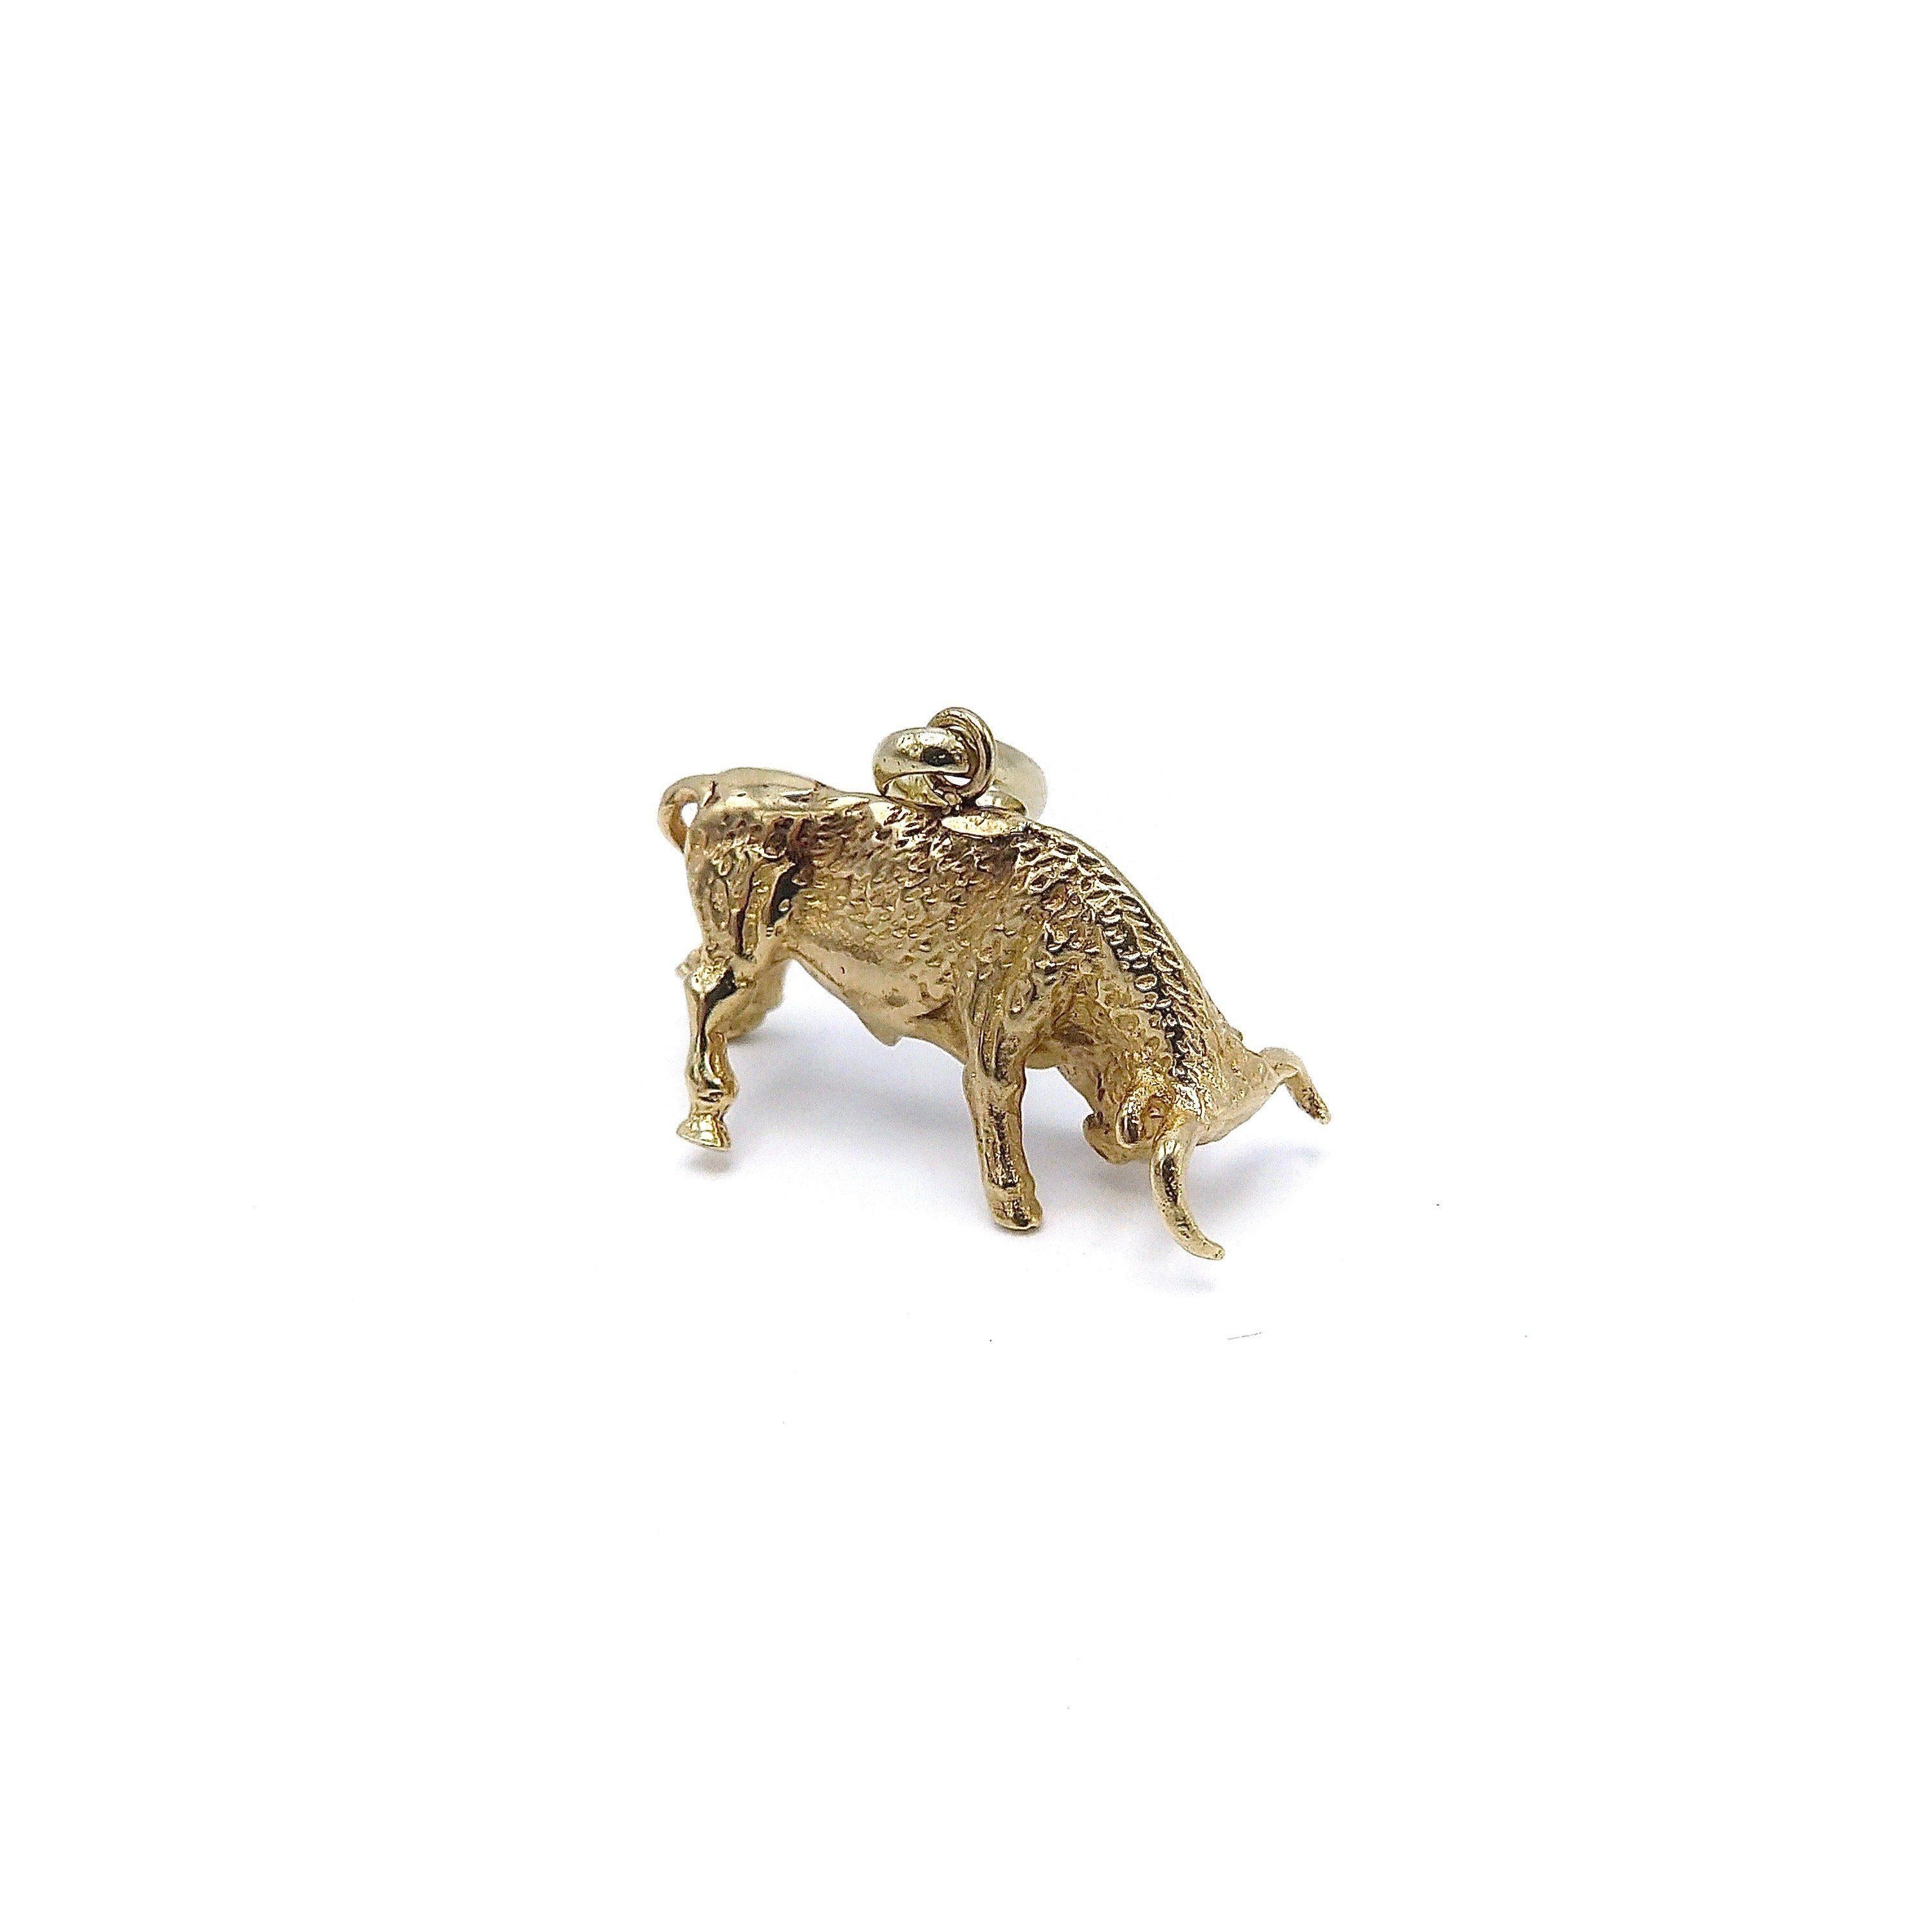 This small yet powerful 14k gold bull pedant-charm is realistically rendered with meticulous details throughout the body. Bulls symbolize stamina, strength, and power. They are also the symbol for the Taurus Zodiac, making them a great talisman for